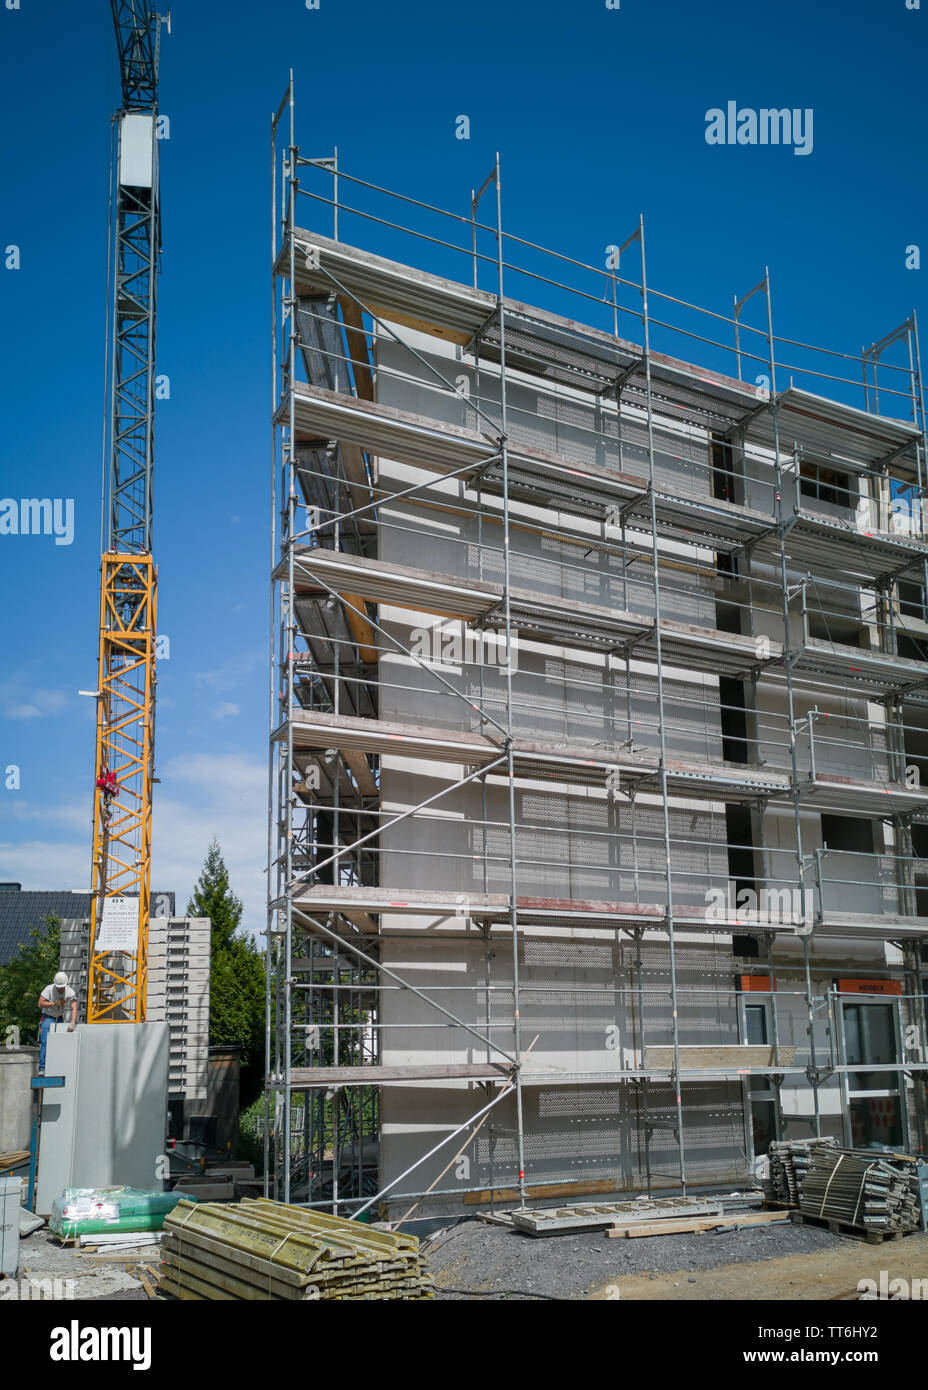 Neuwied, Germany - June 14, 2019: construction site for a new  multistoried building with scaffold and crane Stock Photo